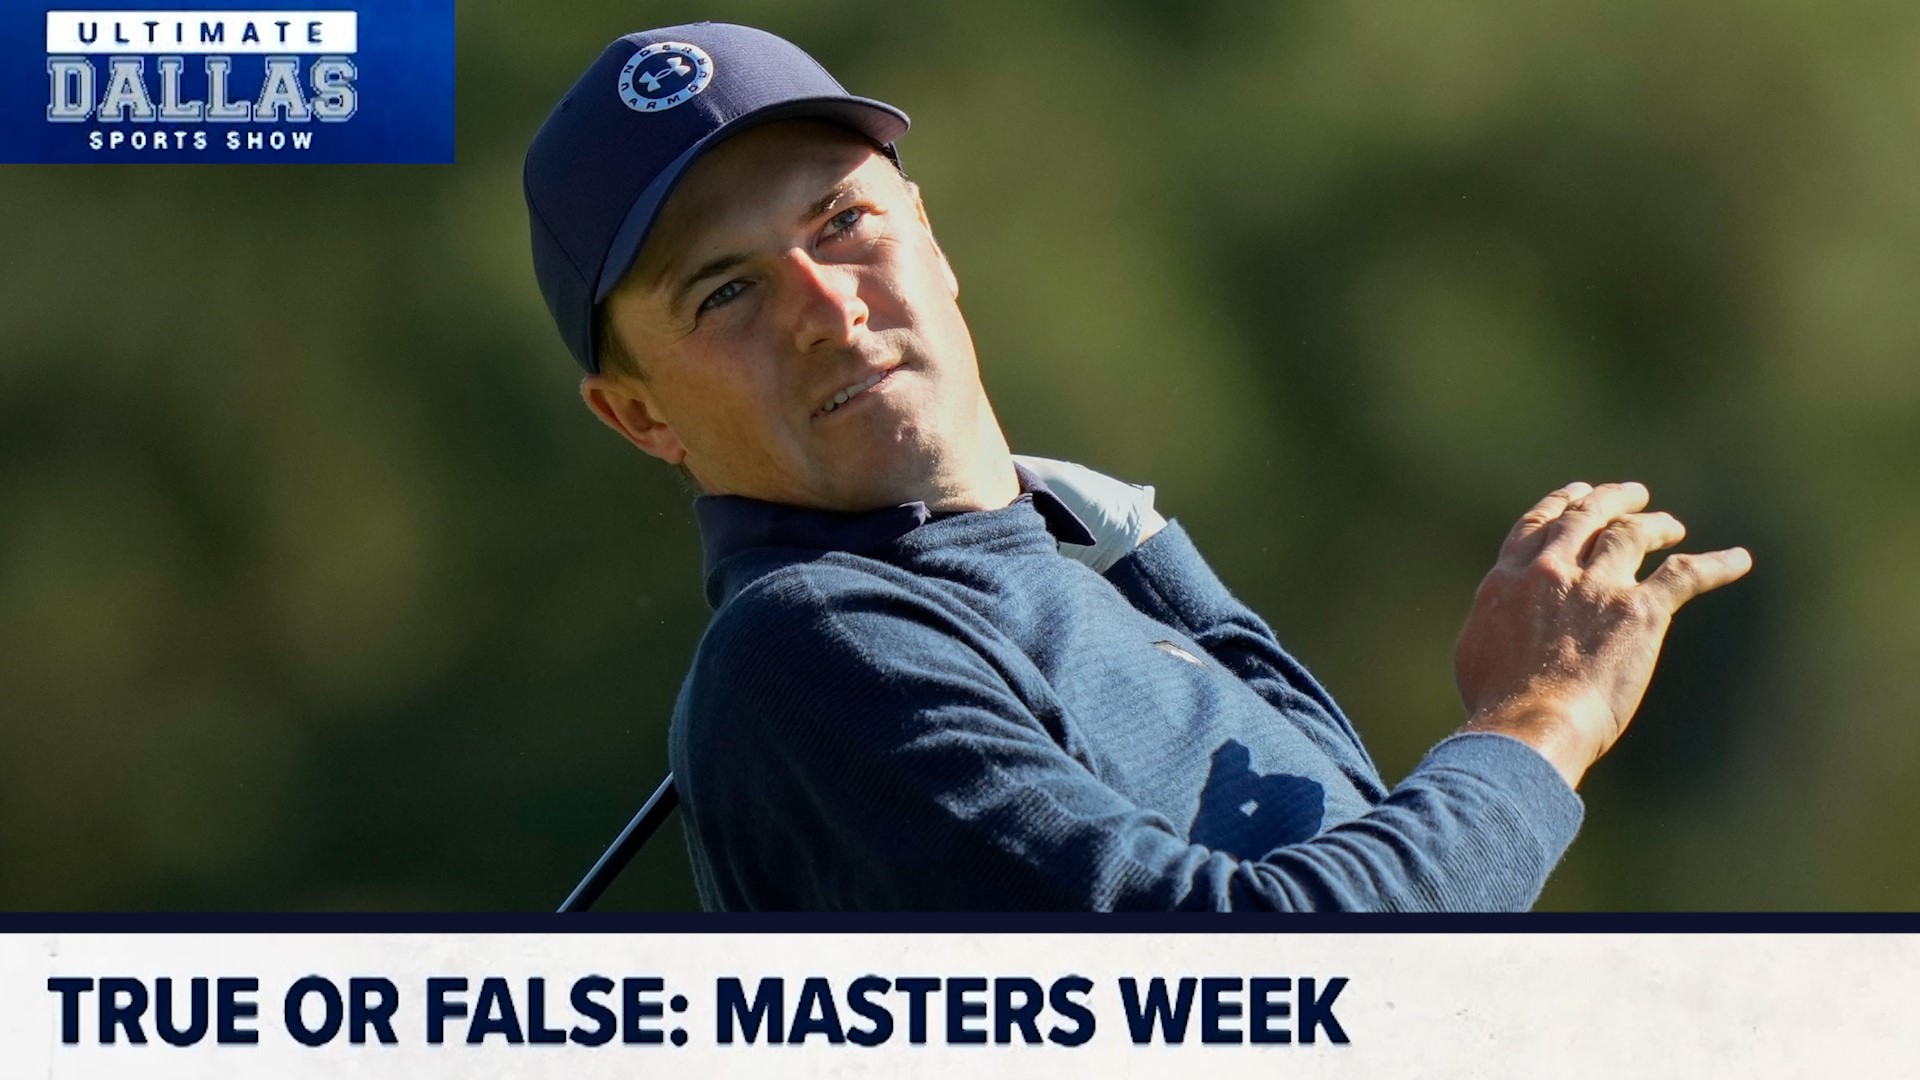 Was the Masters shut down during World War II to become an arboretum? Find out the answer to this question and more on Ultimate Dallas Sports Show's True or False!